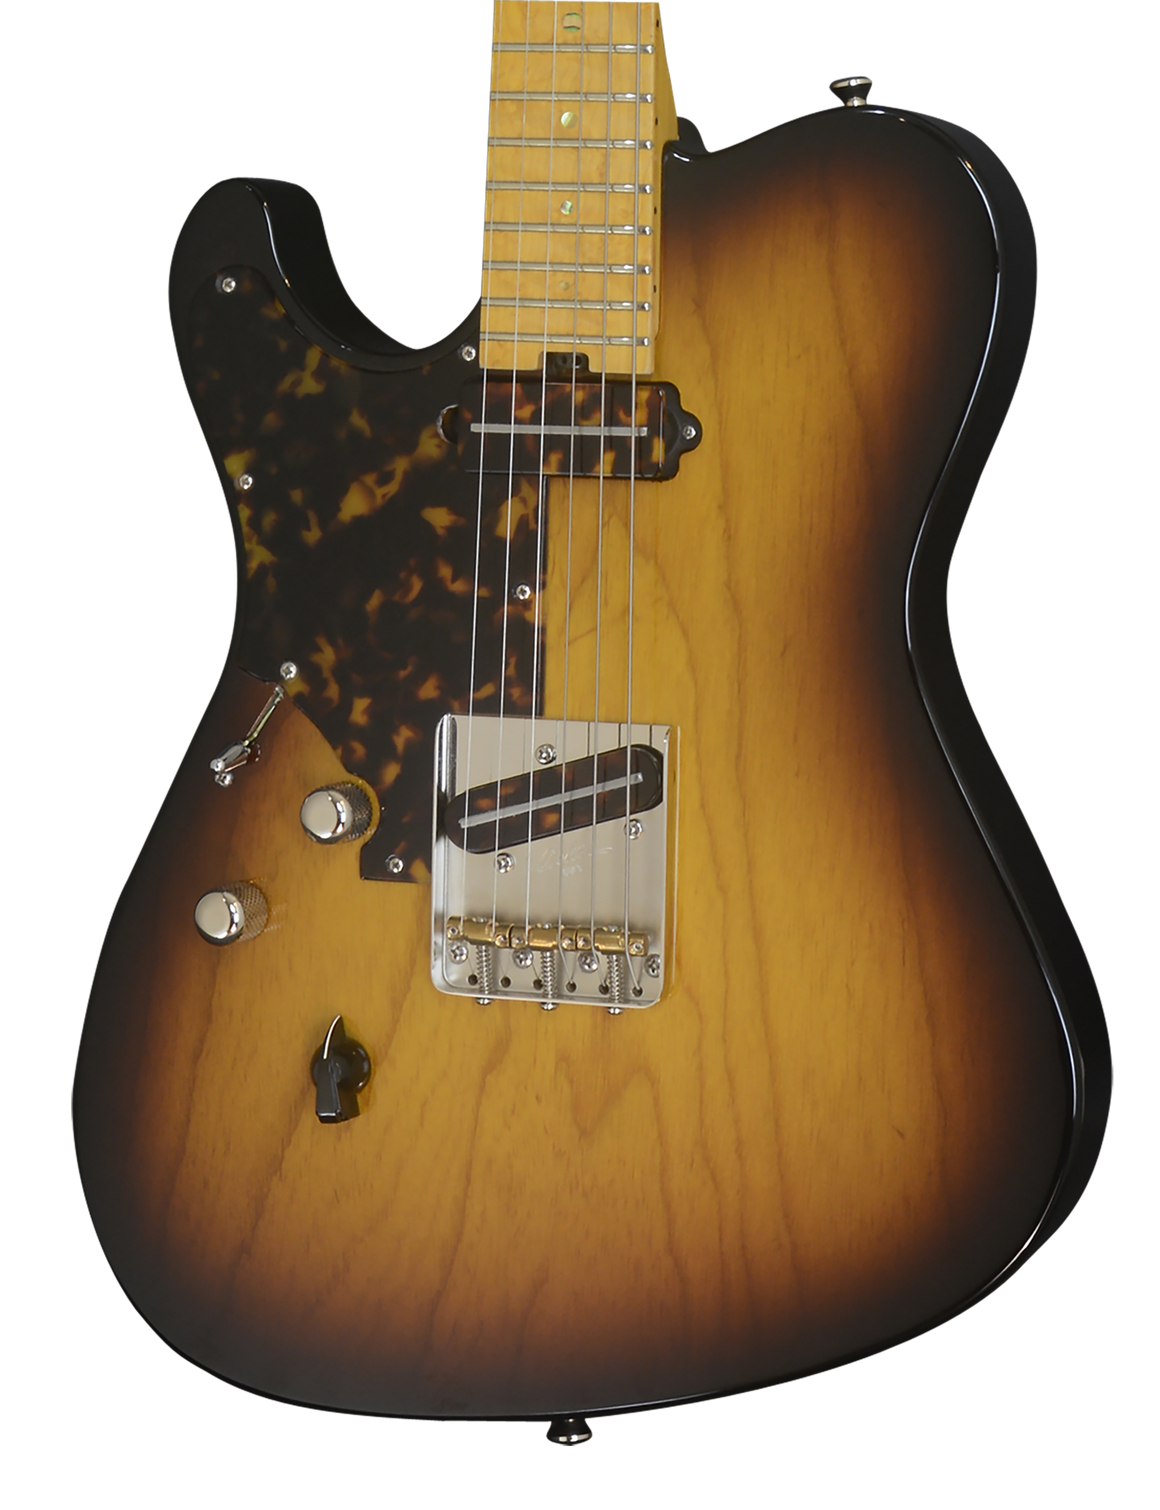 SOLD 2017 T Deluxe Tobacco Burst Lefty with Tortoise Pick Guard, #1016